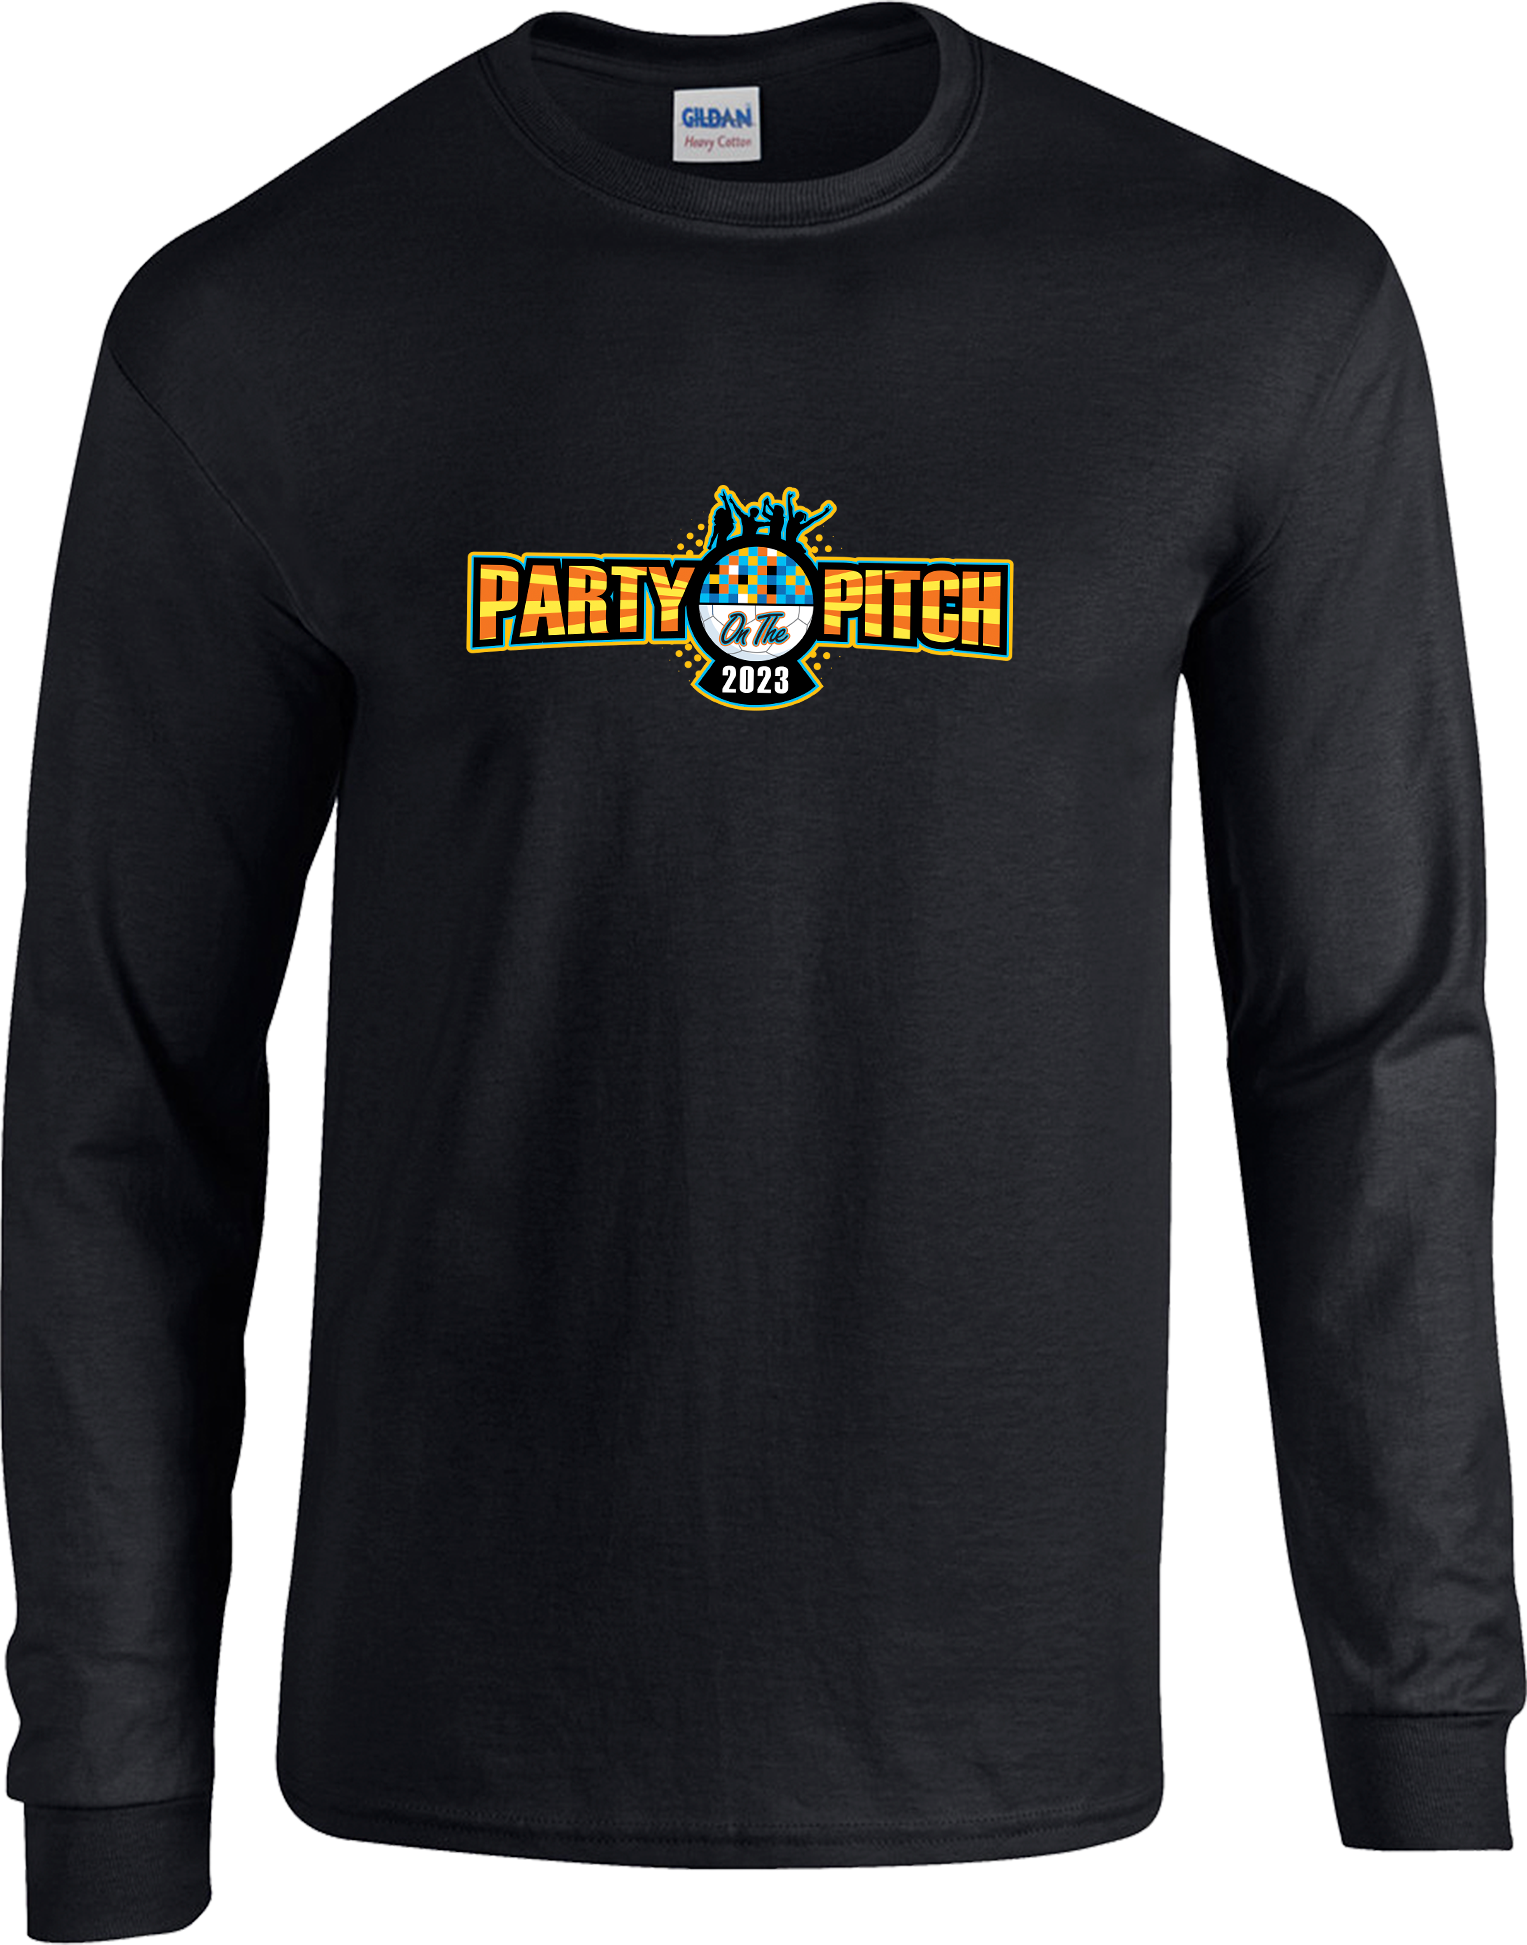 LONG SLEEVES - 2023 Party On The Pitch